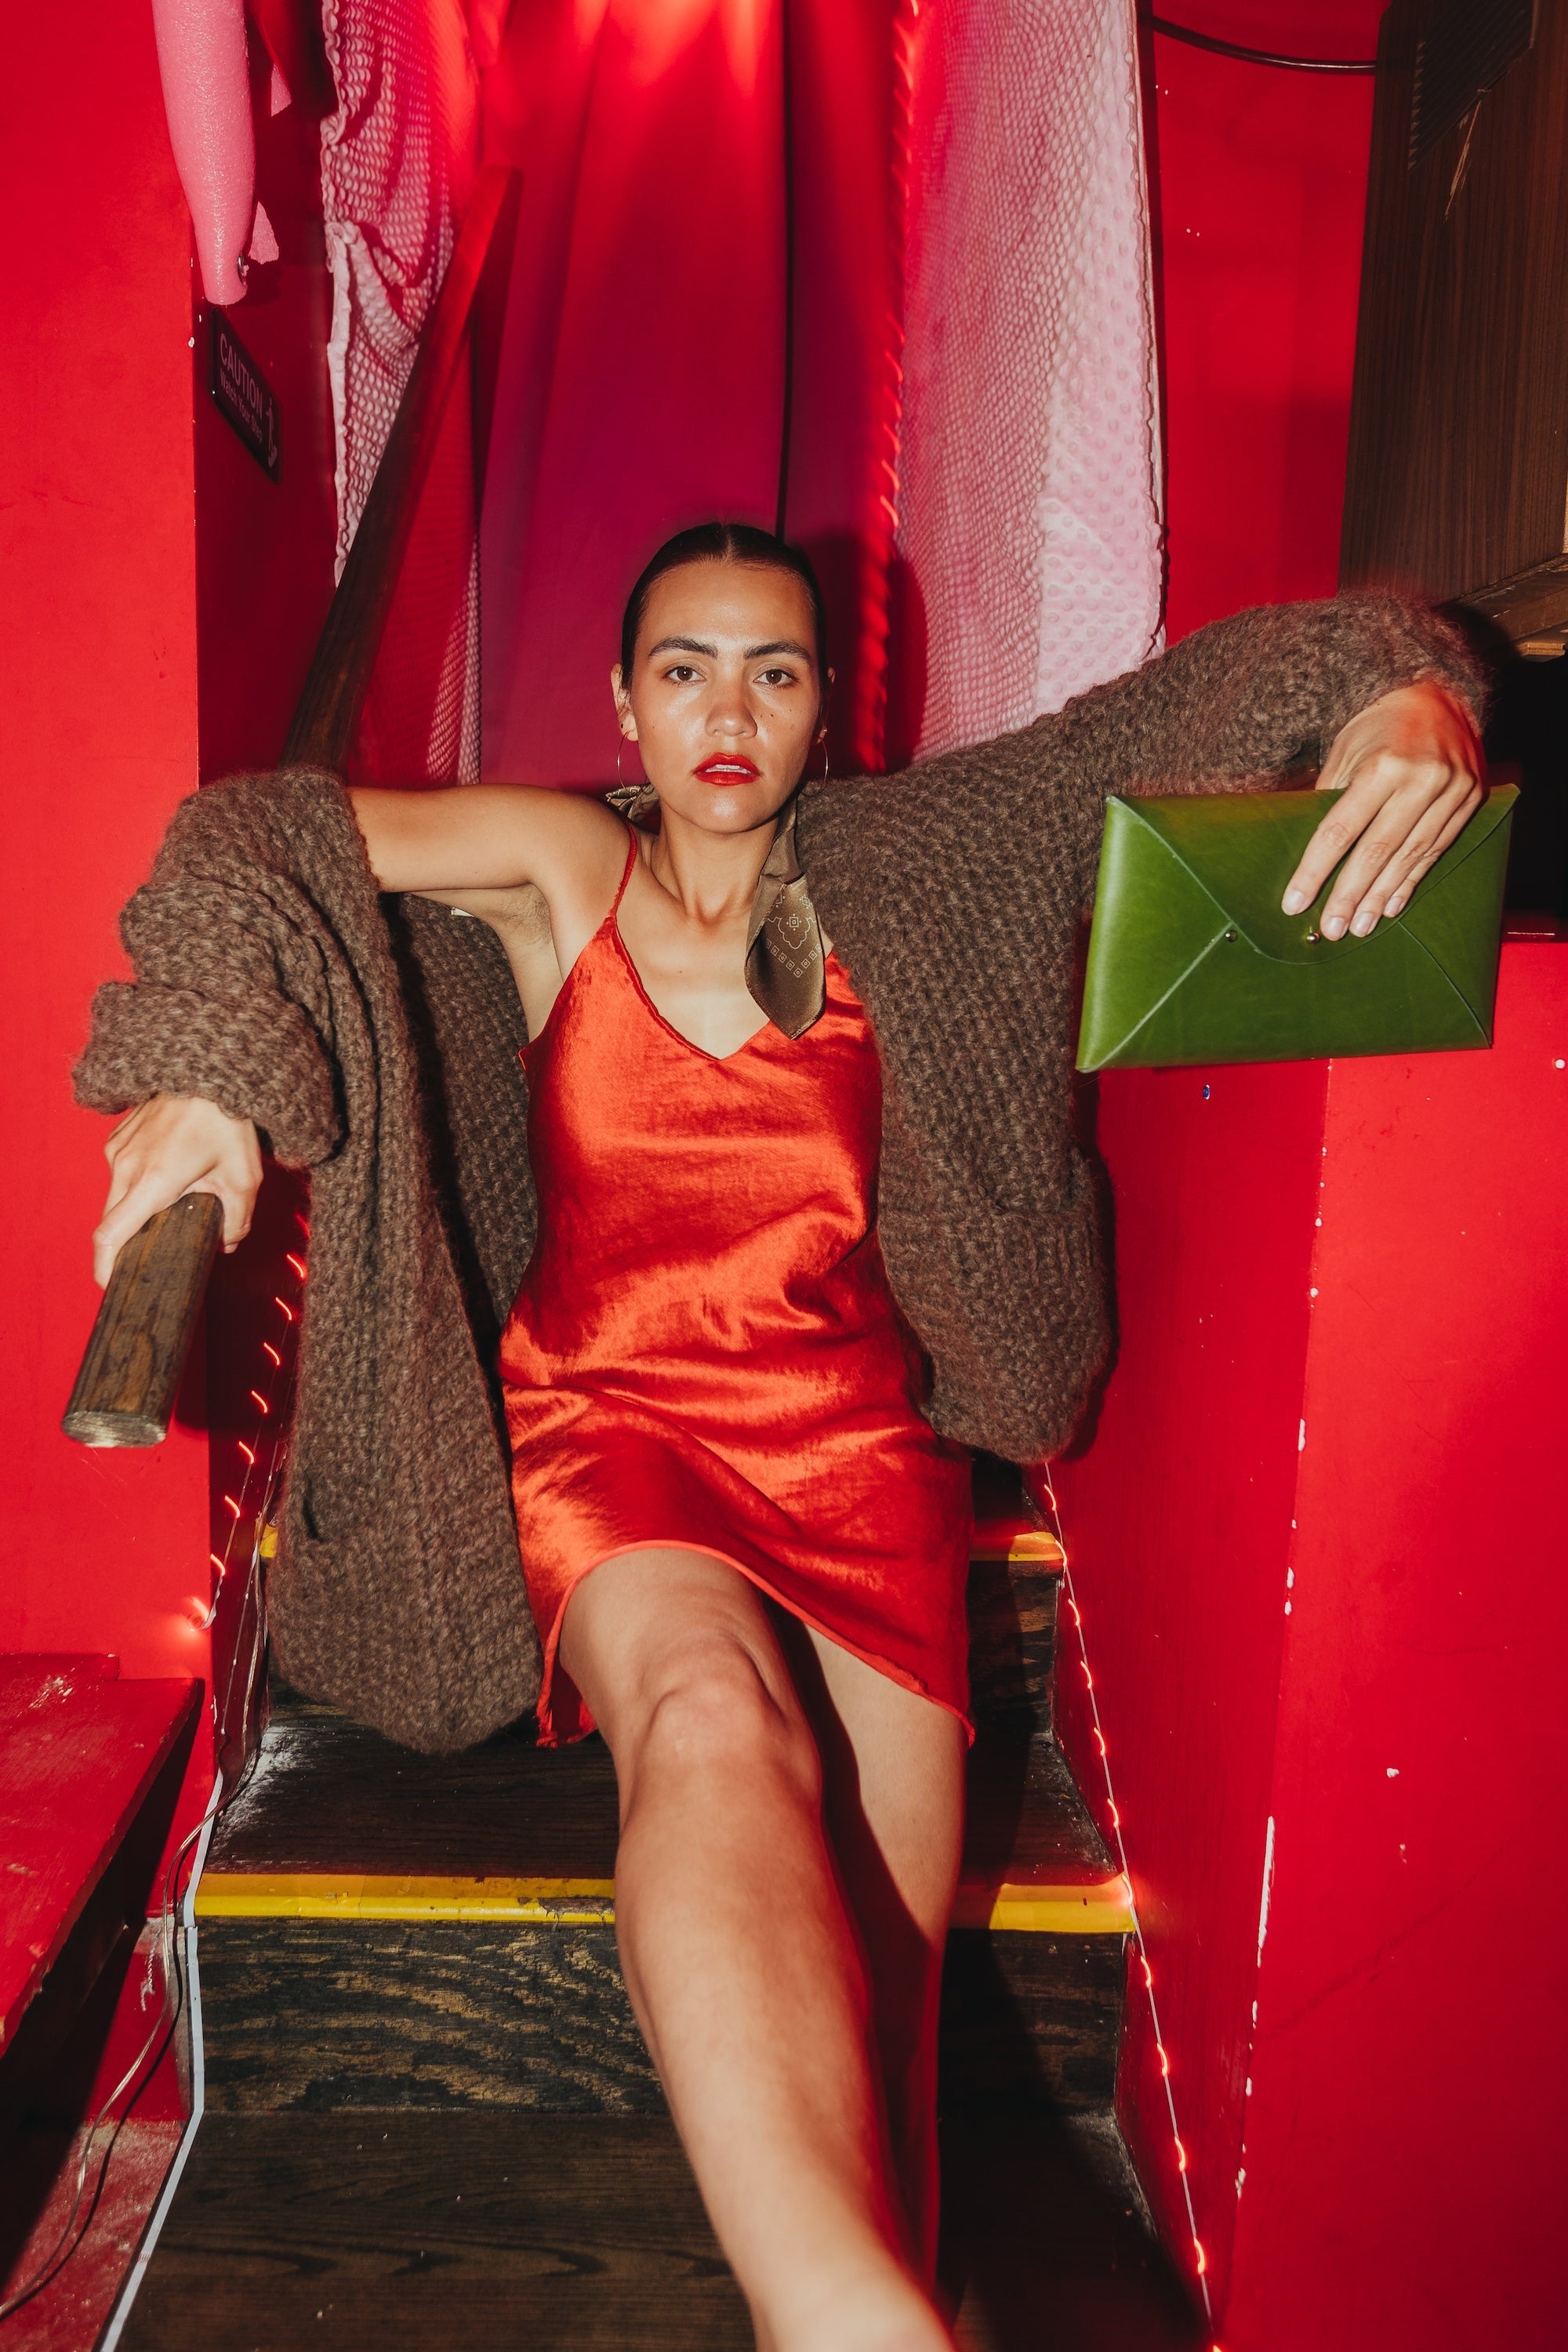 phoebe is a latina woman wearing the danielle dean little red dress with a brown lulua cardigan by nia thomas. she is in a red stairwell holding a bright green elidia the label envelope clutch.